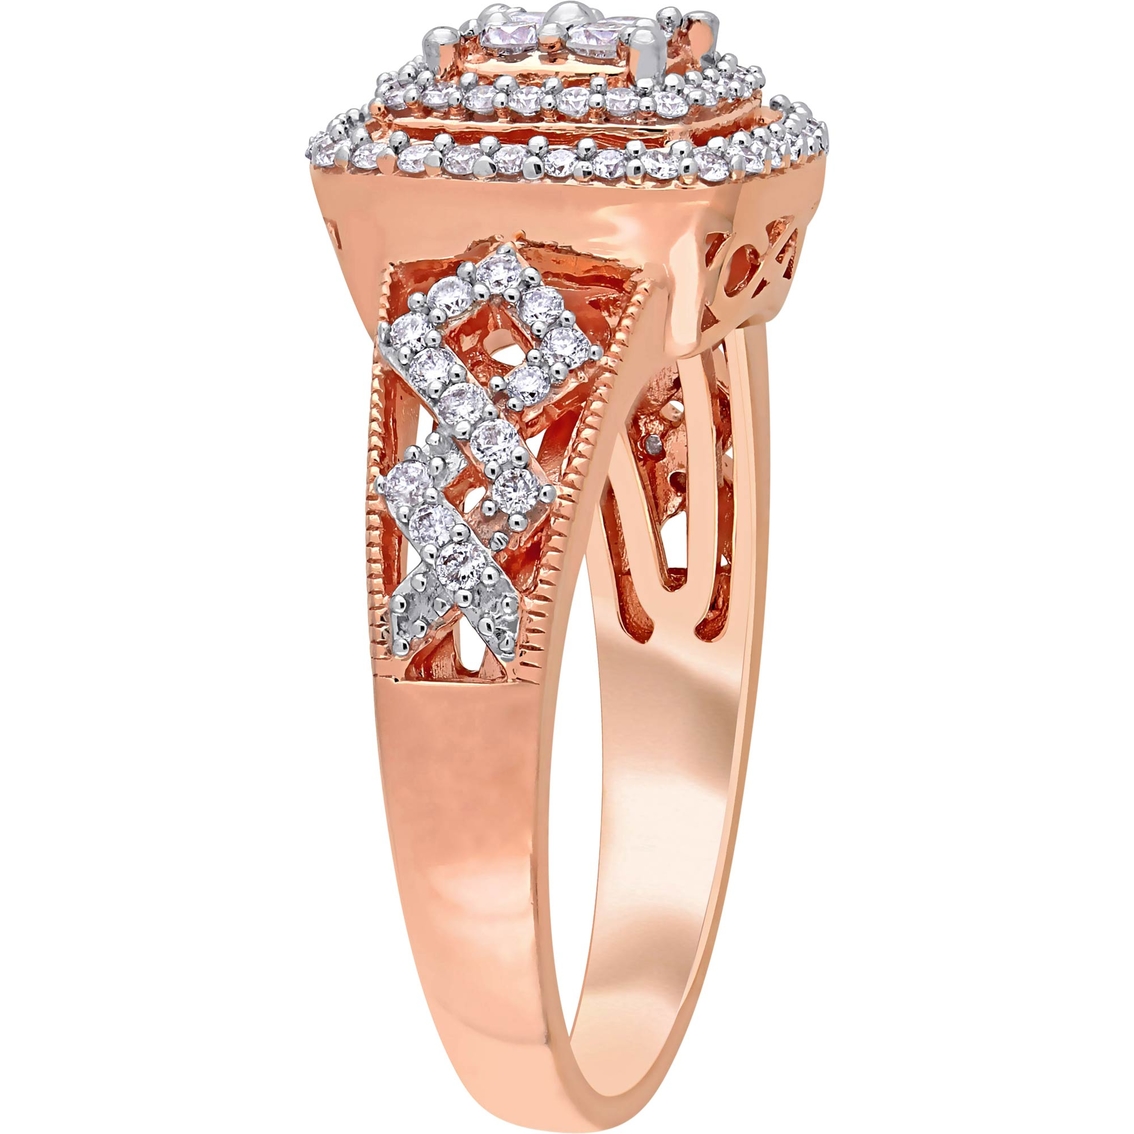 Diamore 14K Rose Gold 1/2 CTW Diamond Cluster Halo Engagement Ring - Image 2 of 4